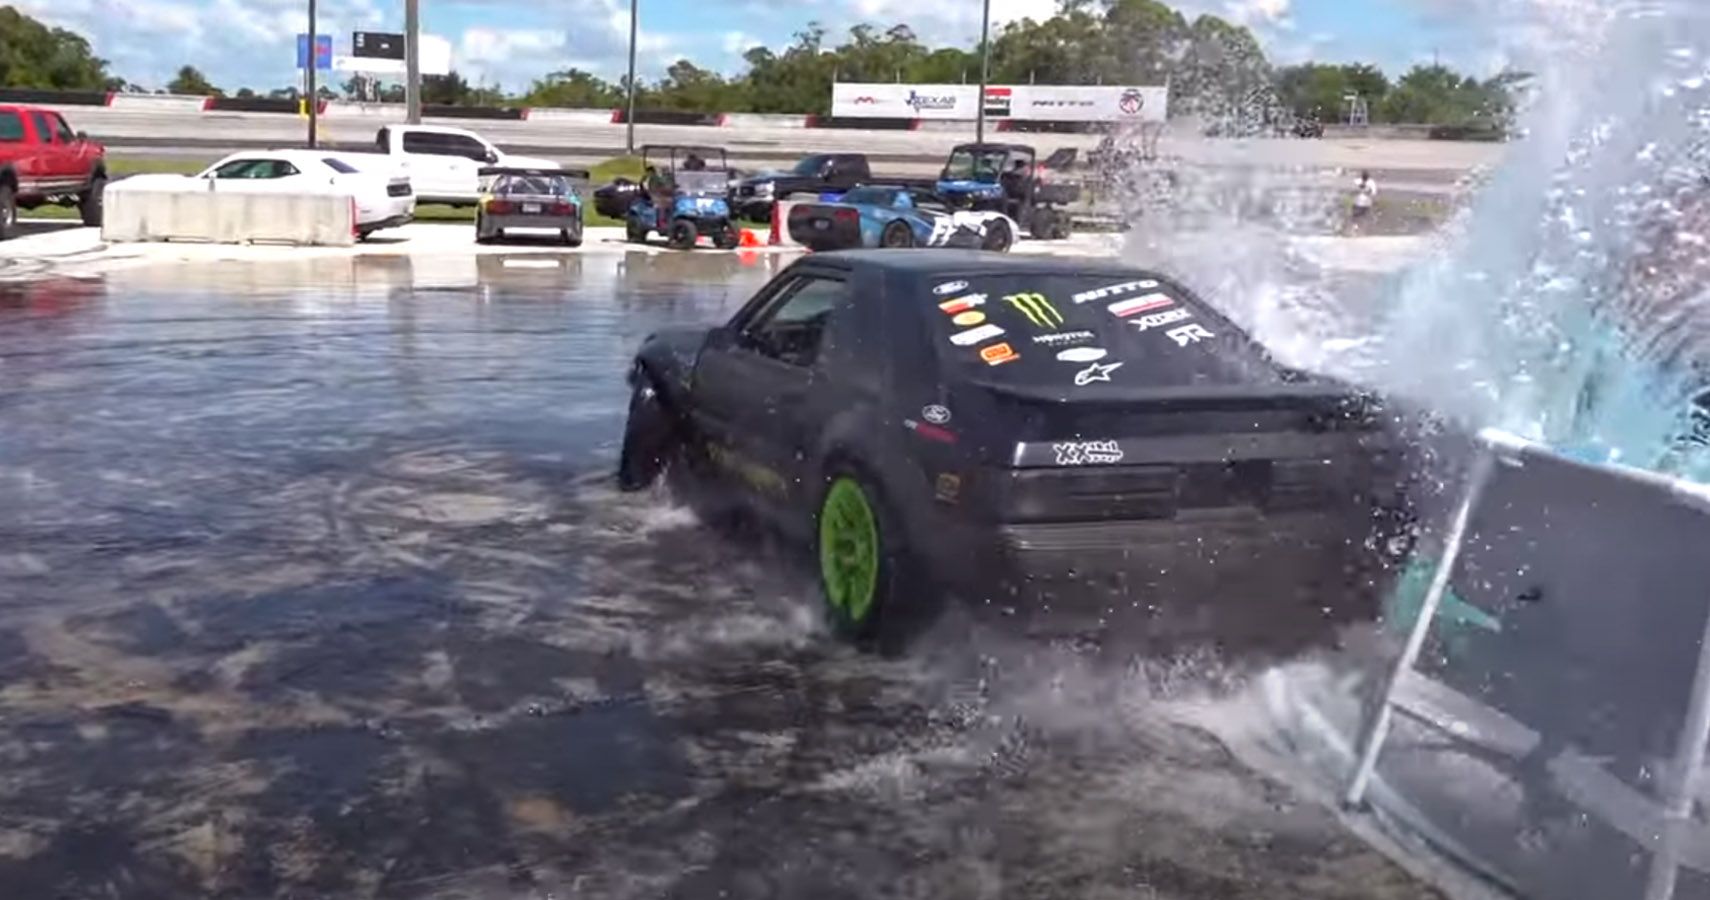 1969 Ford Mustang RTR-X slams into side of swimming pool